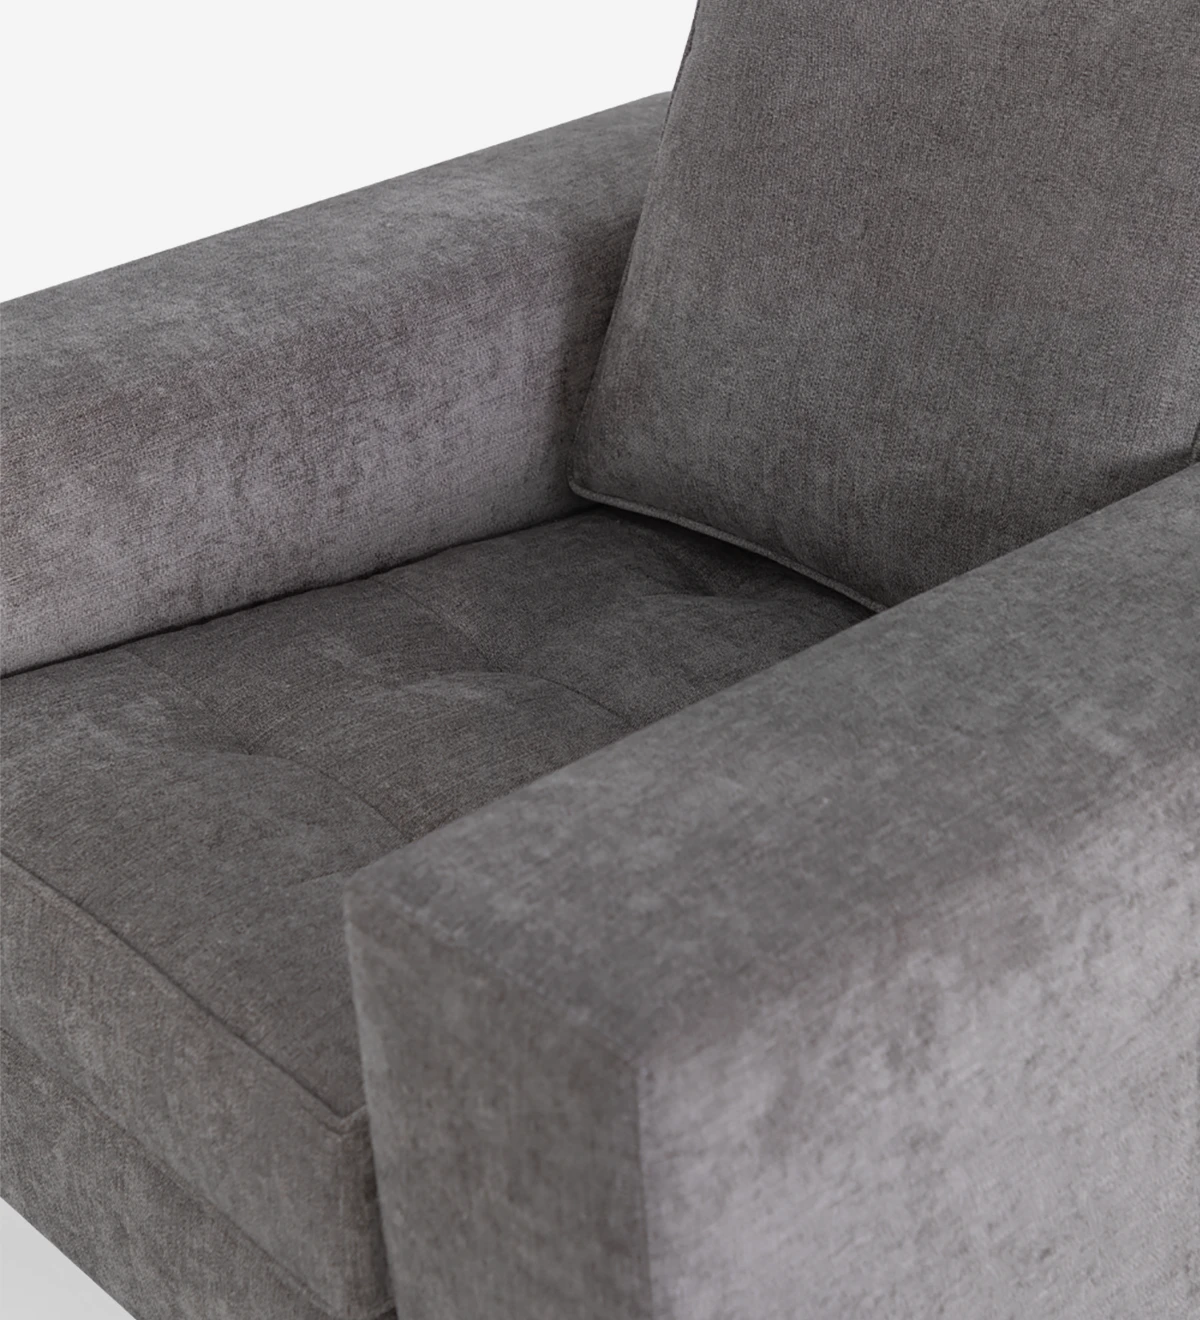 Maple upholstered in fabric with black metallic feet.